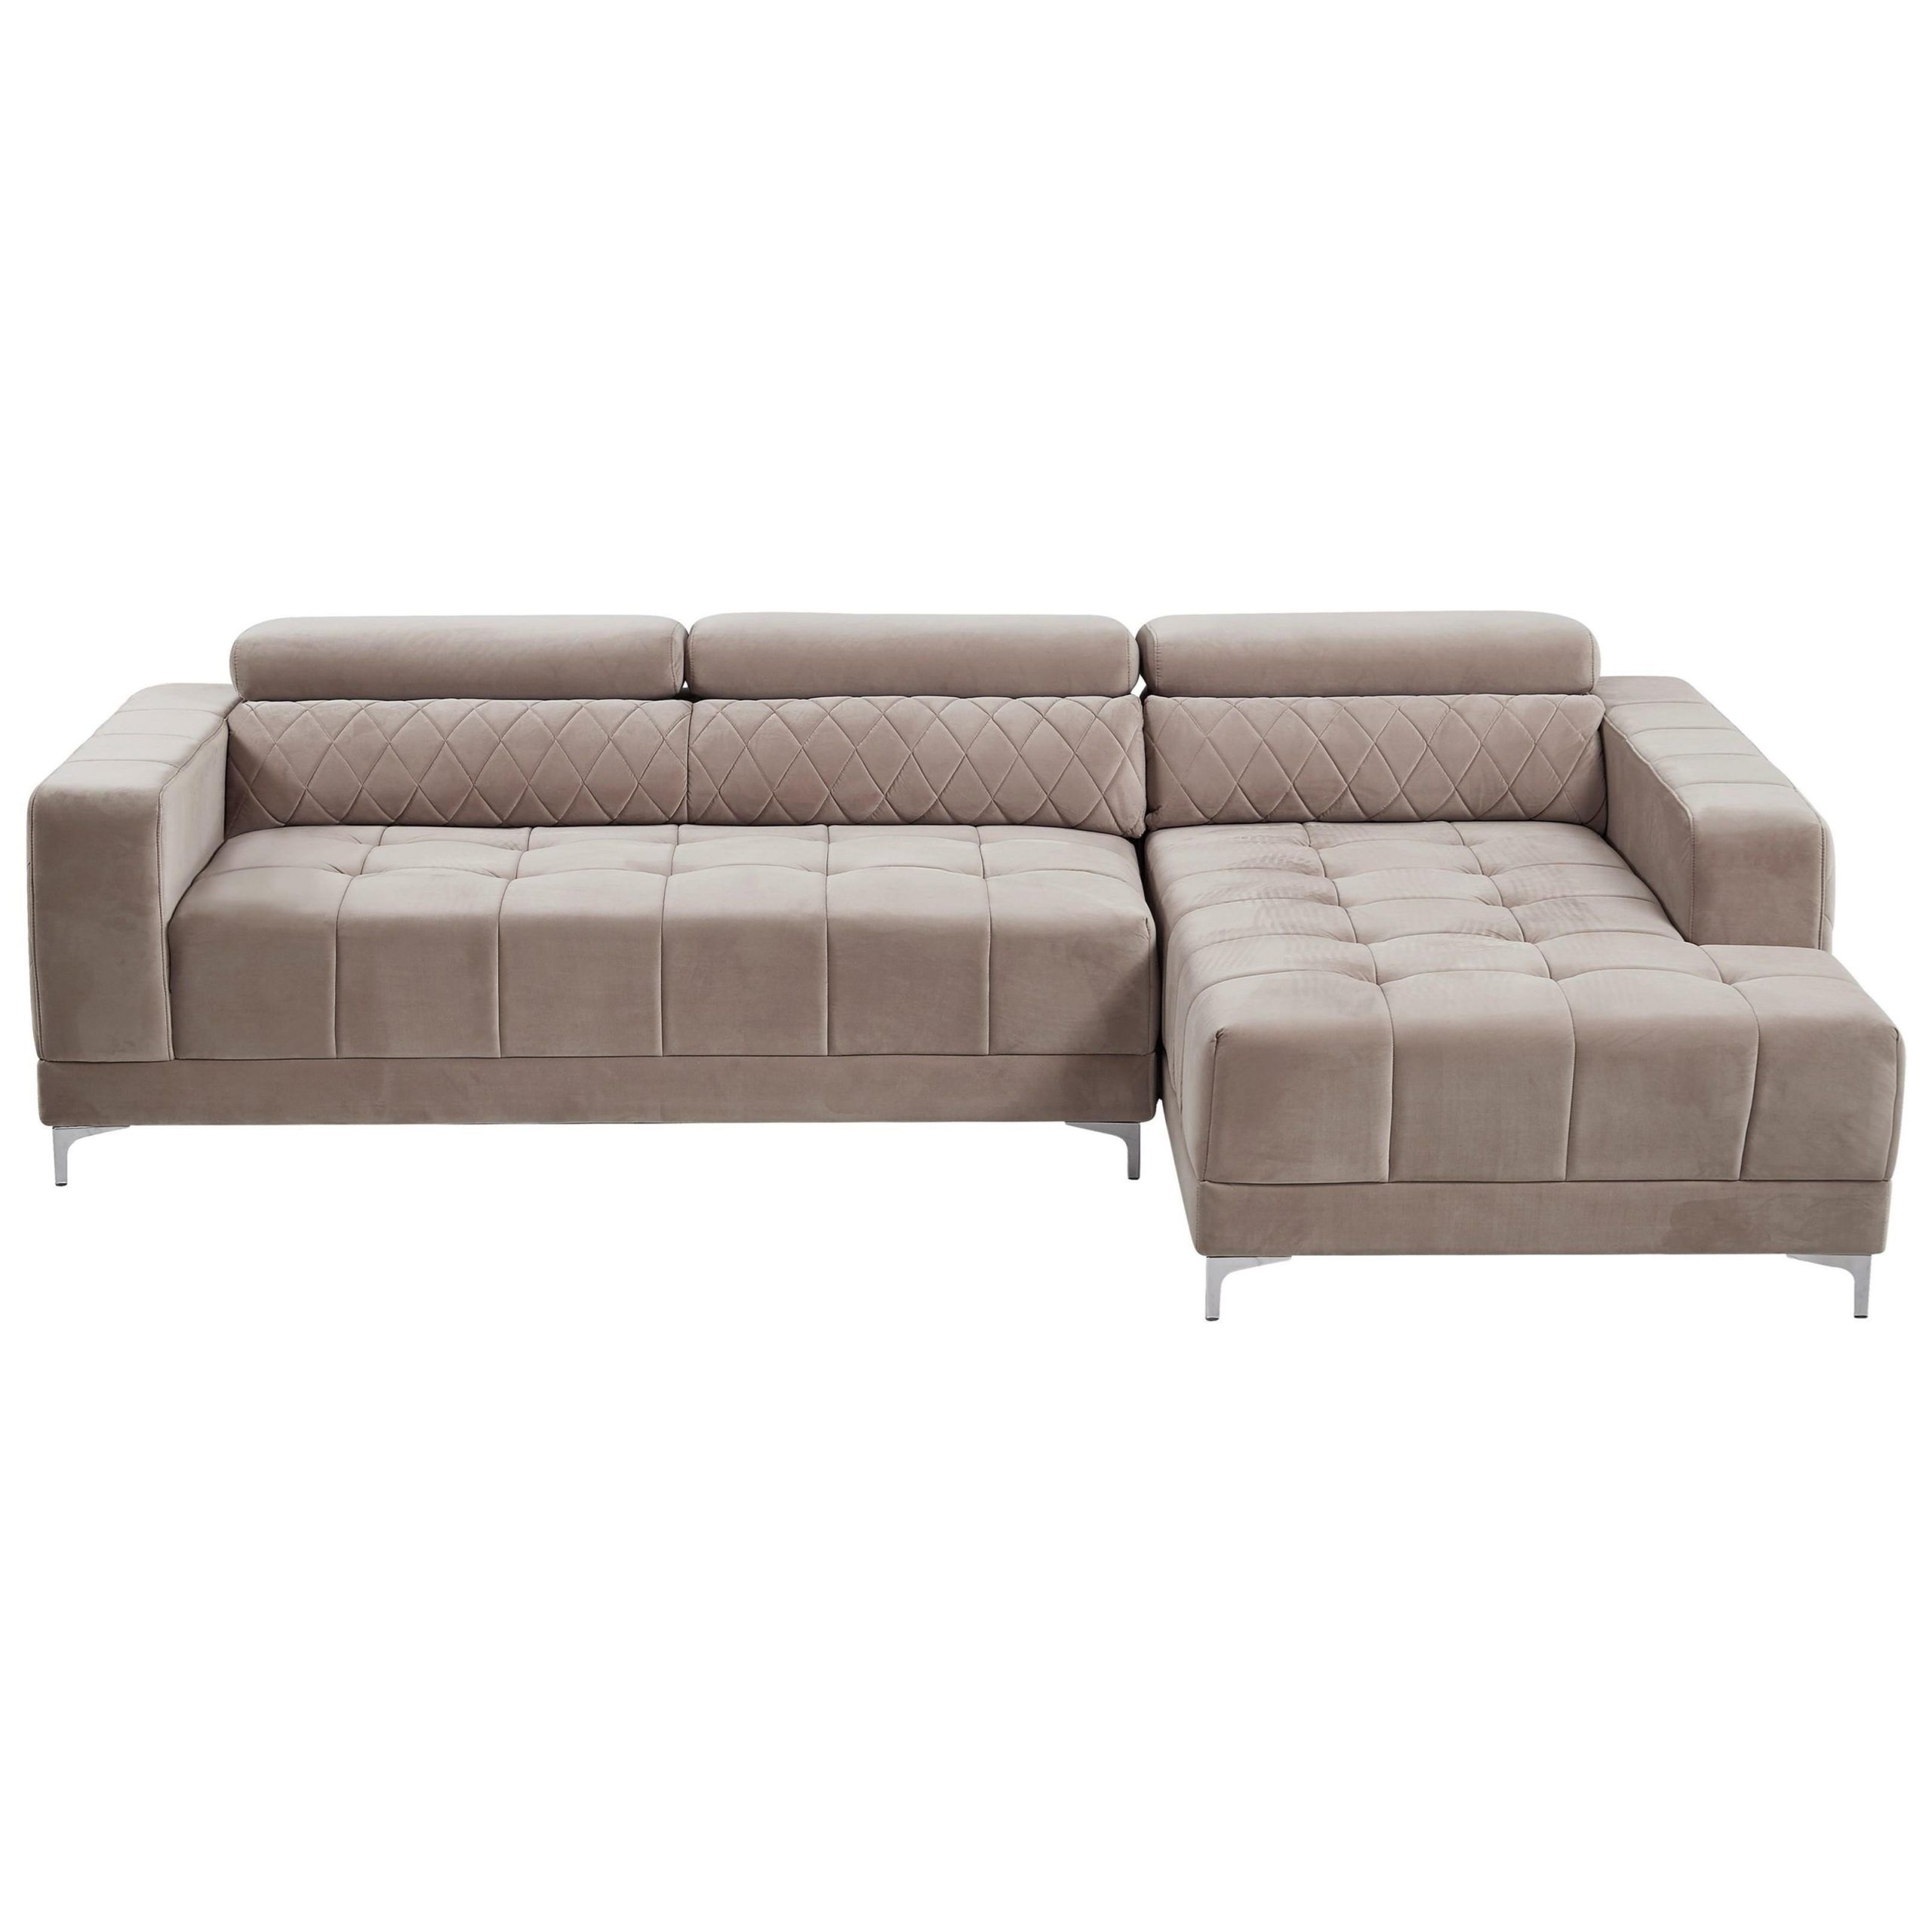 Global Furniture U0037 Contemporary 2 Piece Sectional With In 2pc Burland Contemporary Sectional Sofas Charcoal (View 5 of 15)